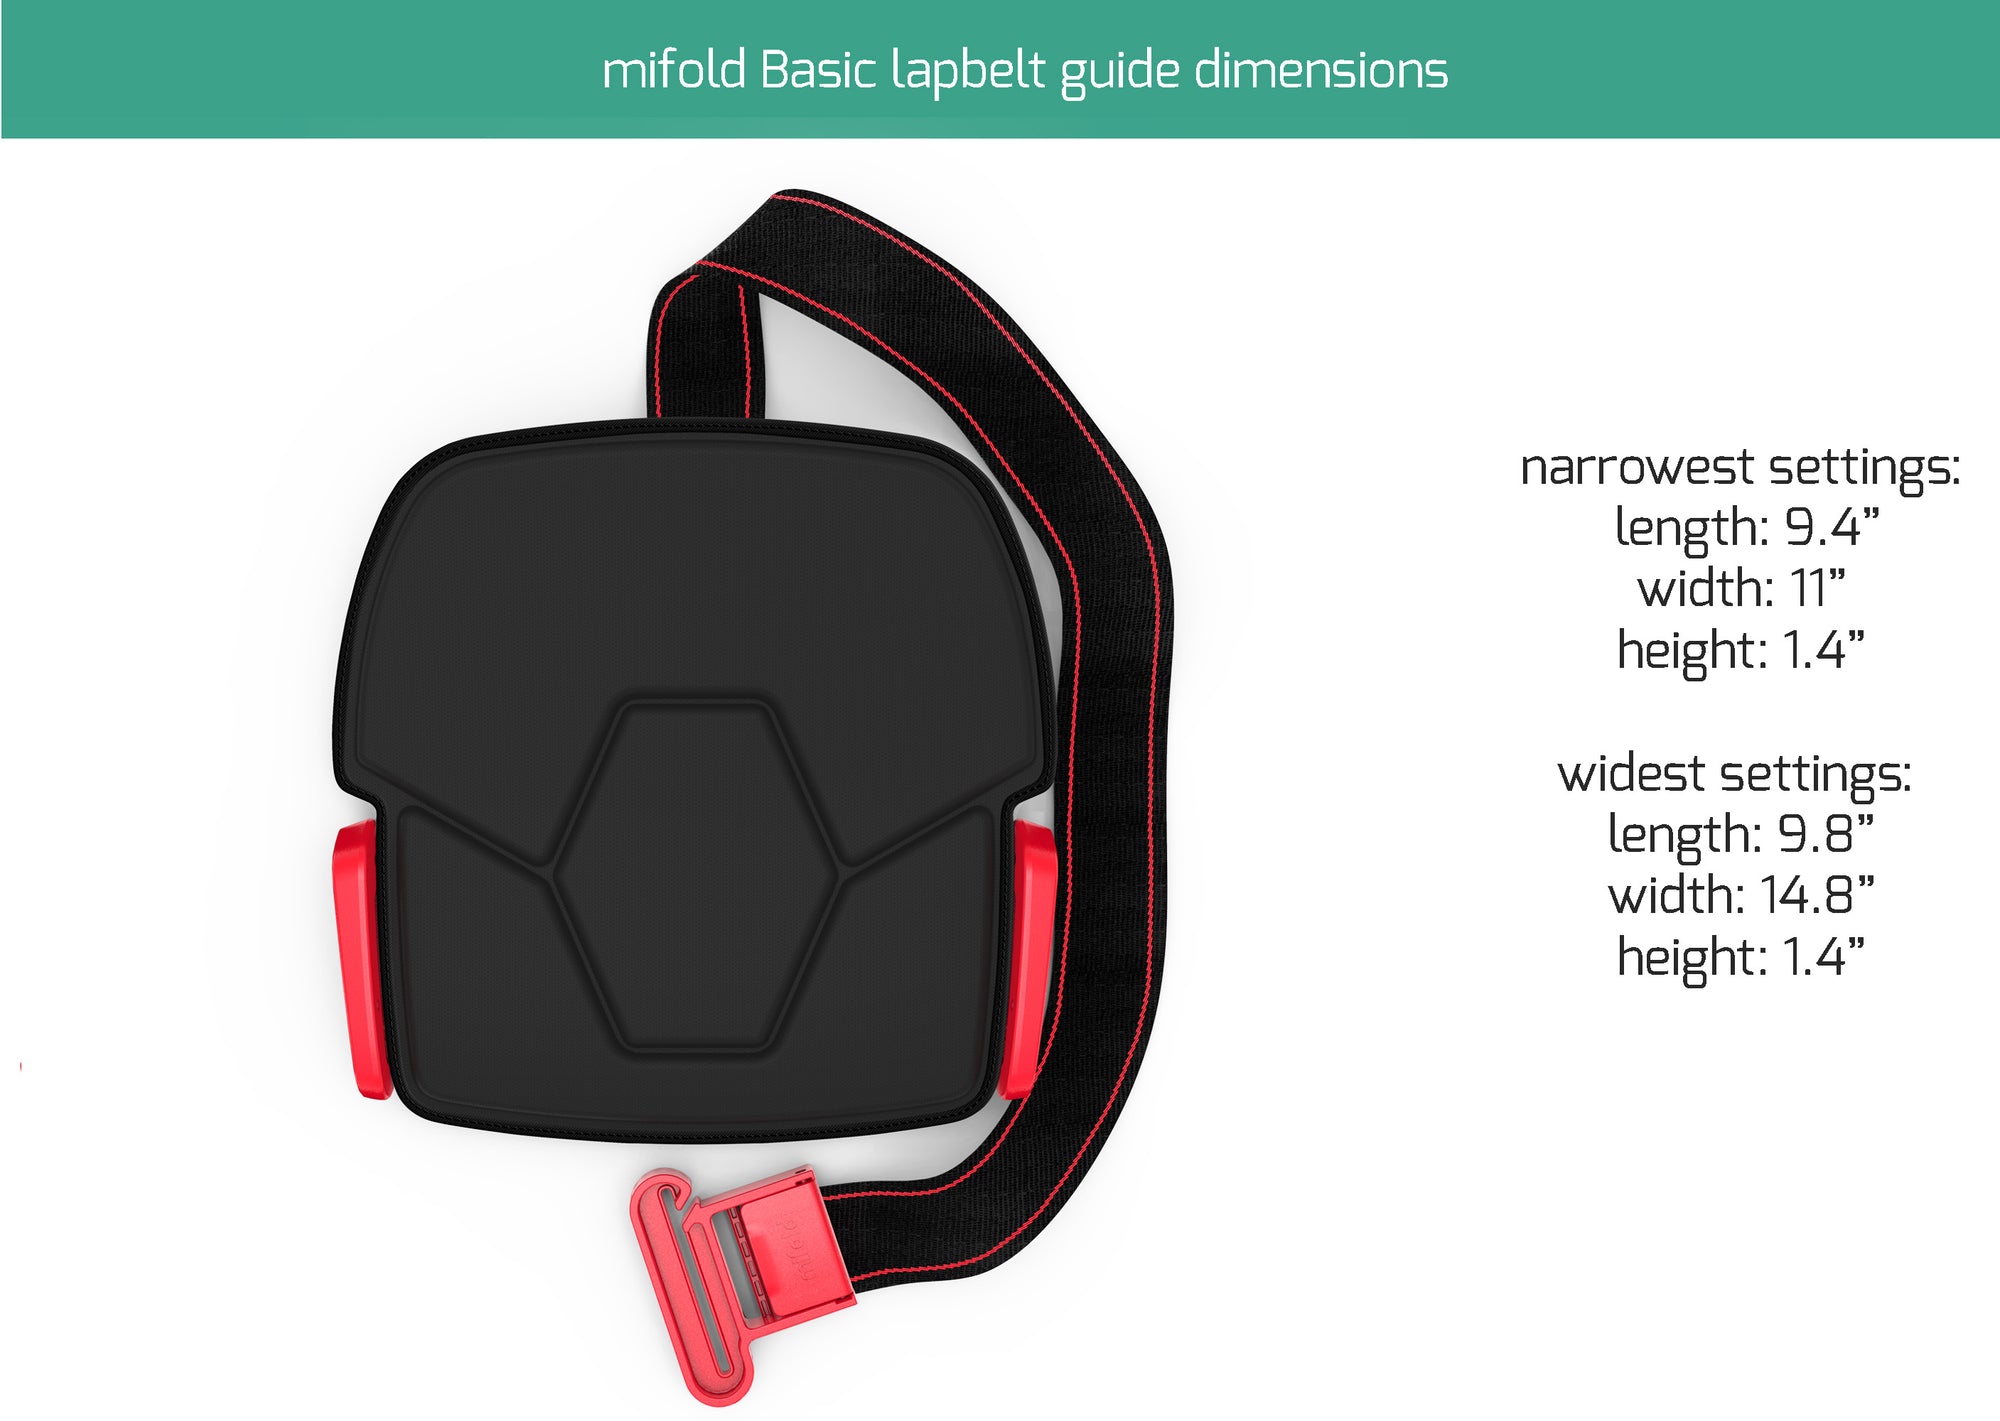 mifold Basic dimensions 